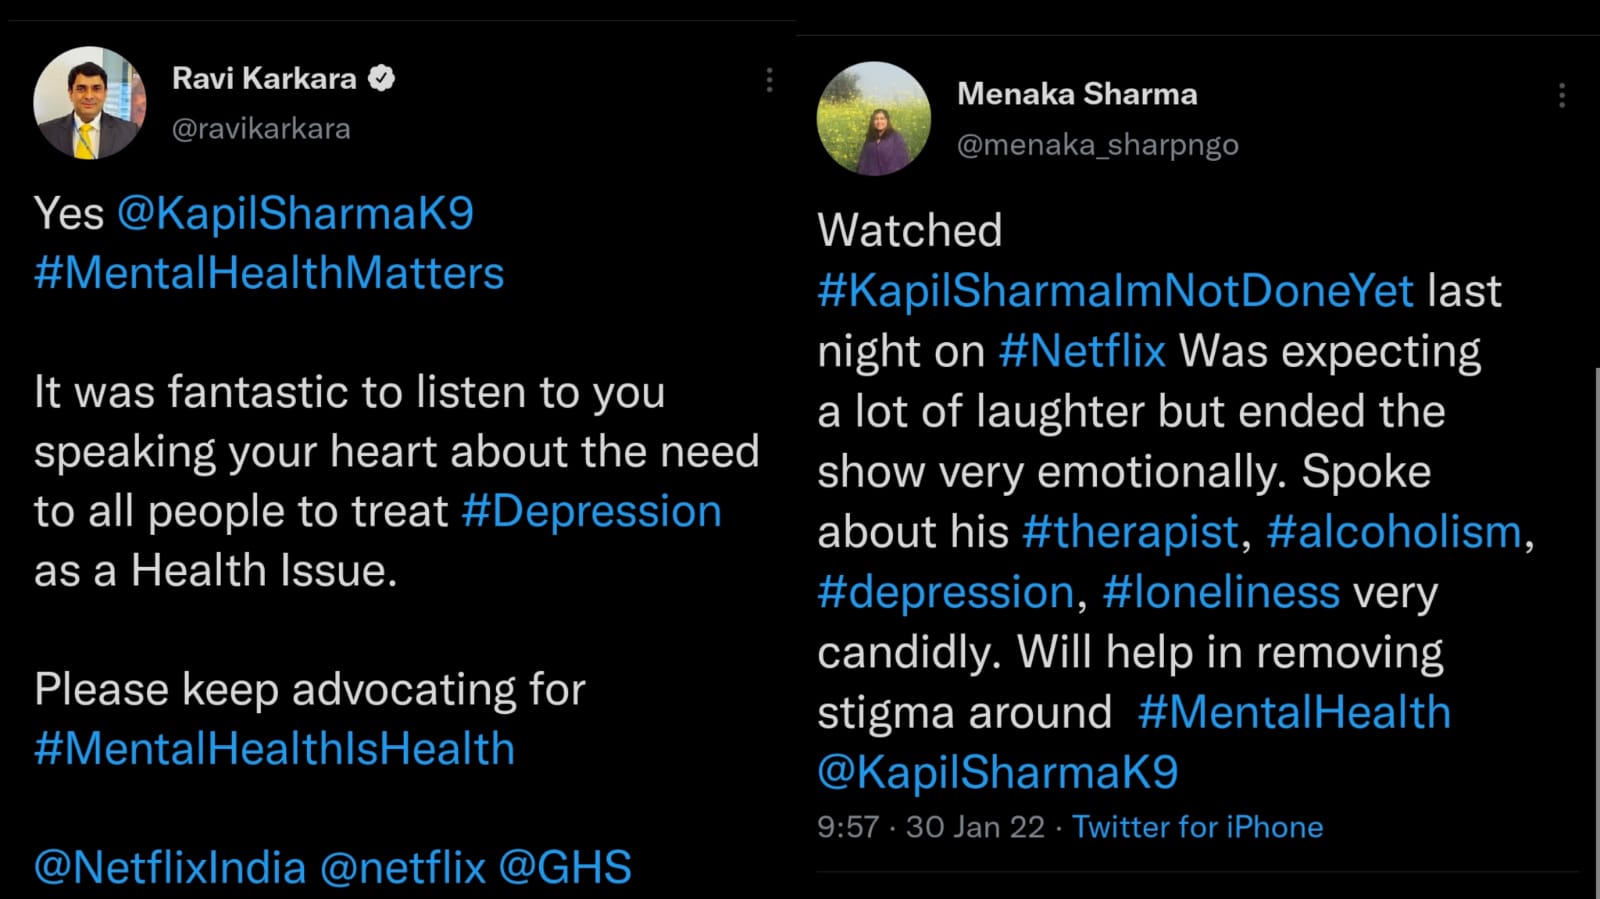 Fans tweeted in praise of Kapil Sharma talking about mental health on his Netflix special.